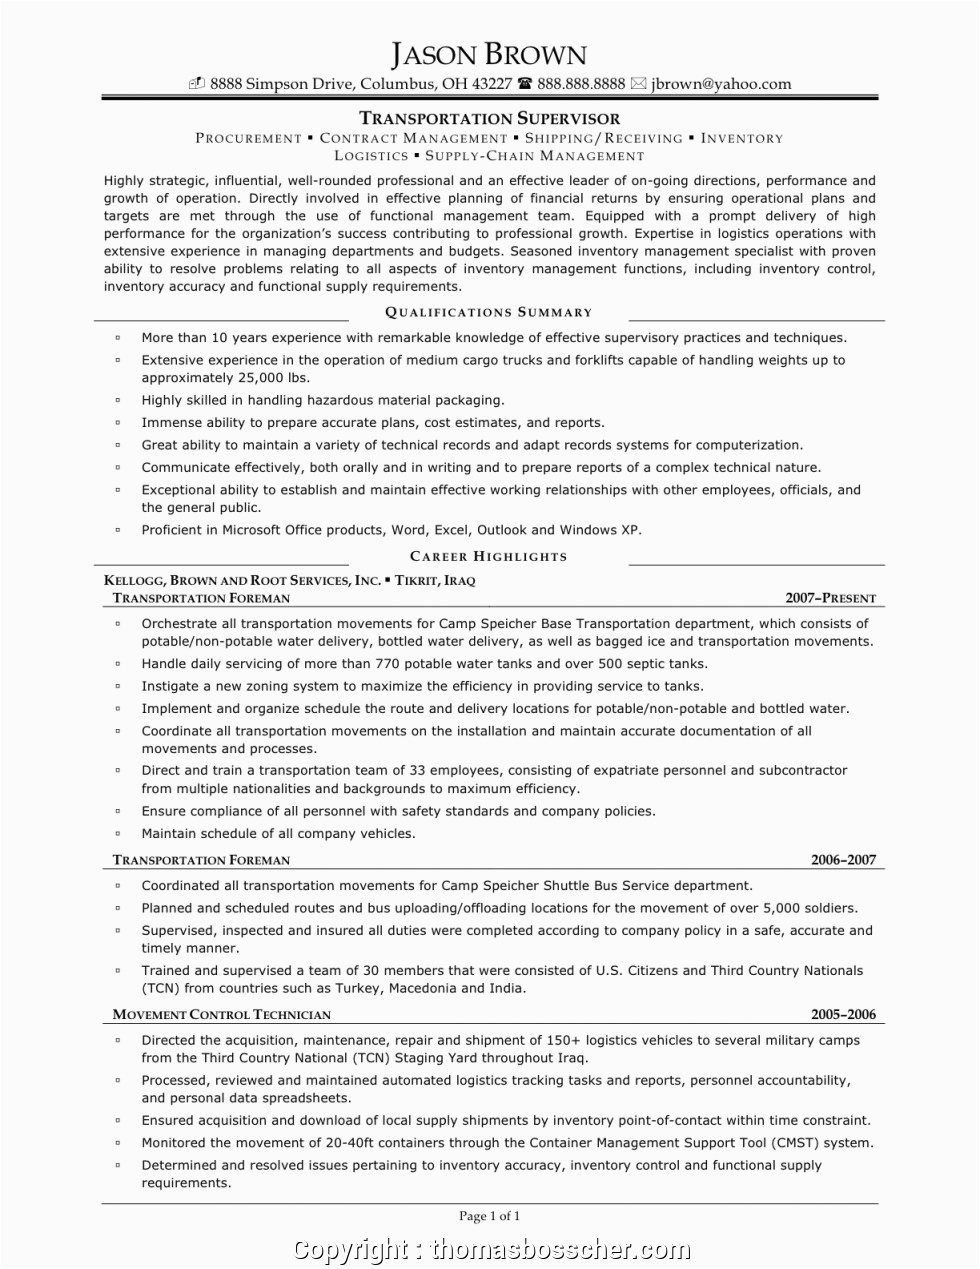 Sample Resume for Warehouse Manager In India Newest Warehouse Manager Resume India Warehouseager Resume